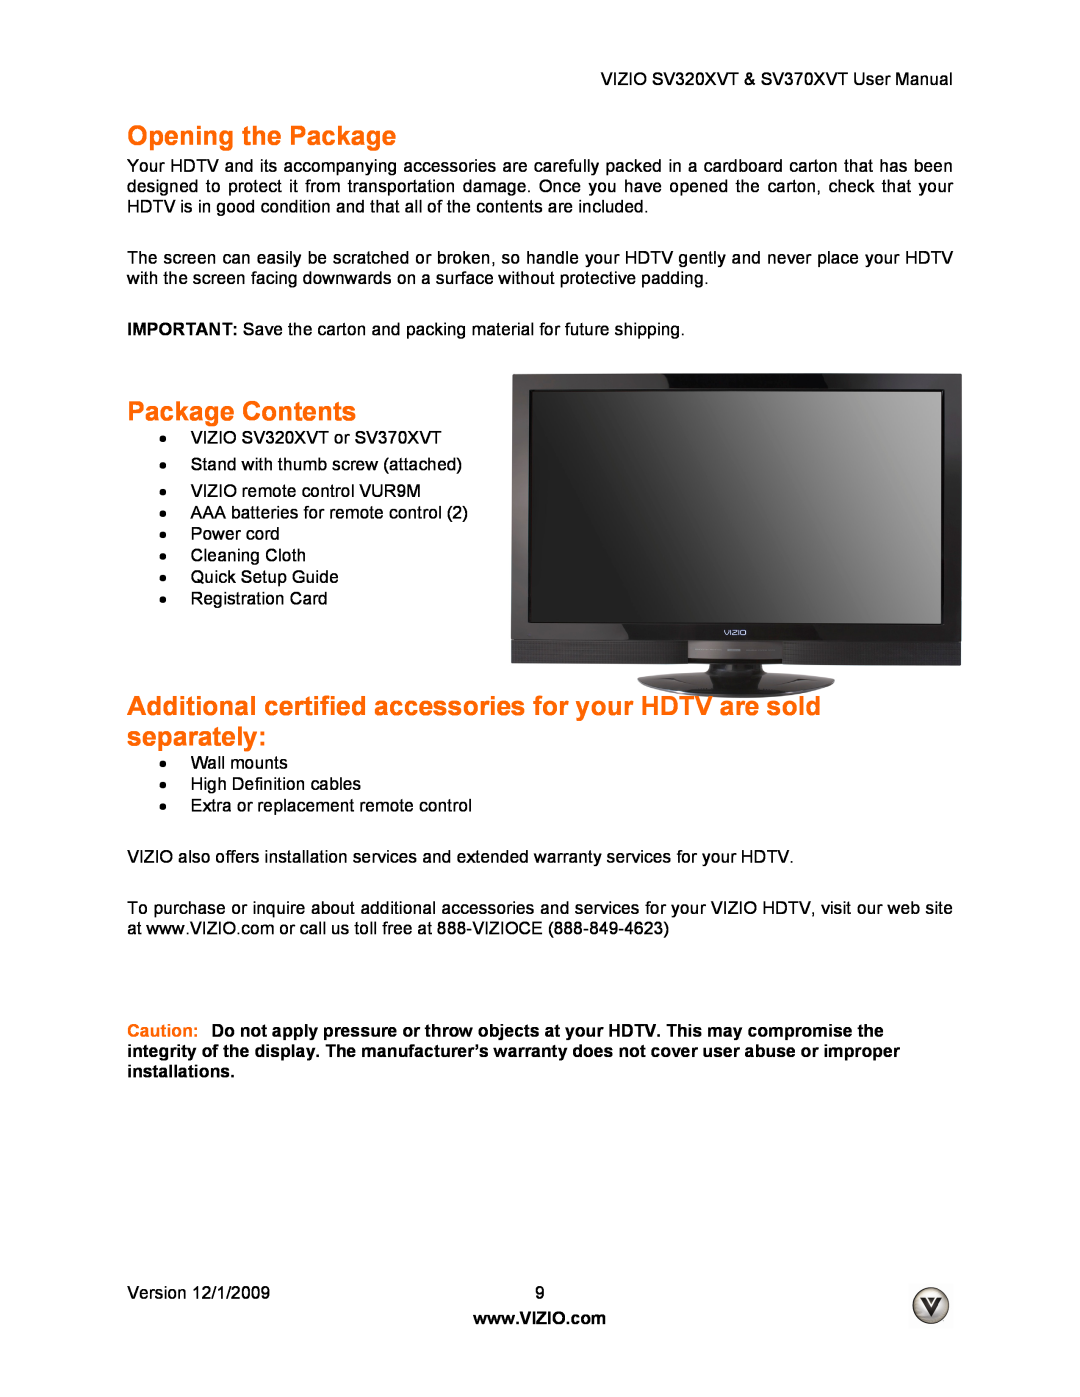 Vizio SV370XVT Opening the Package, Package Contents, Additional certified accessories for your HDTV are sold separately 